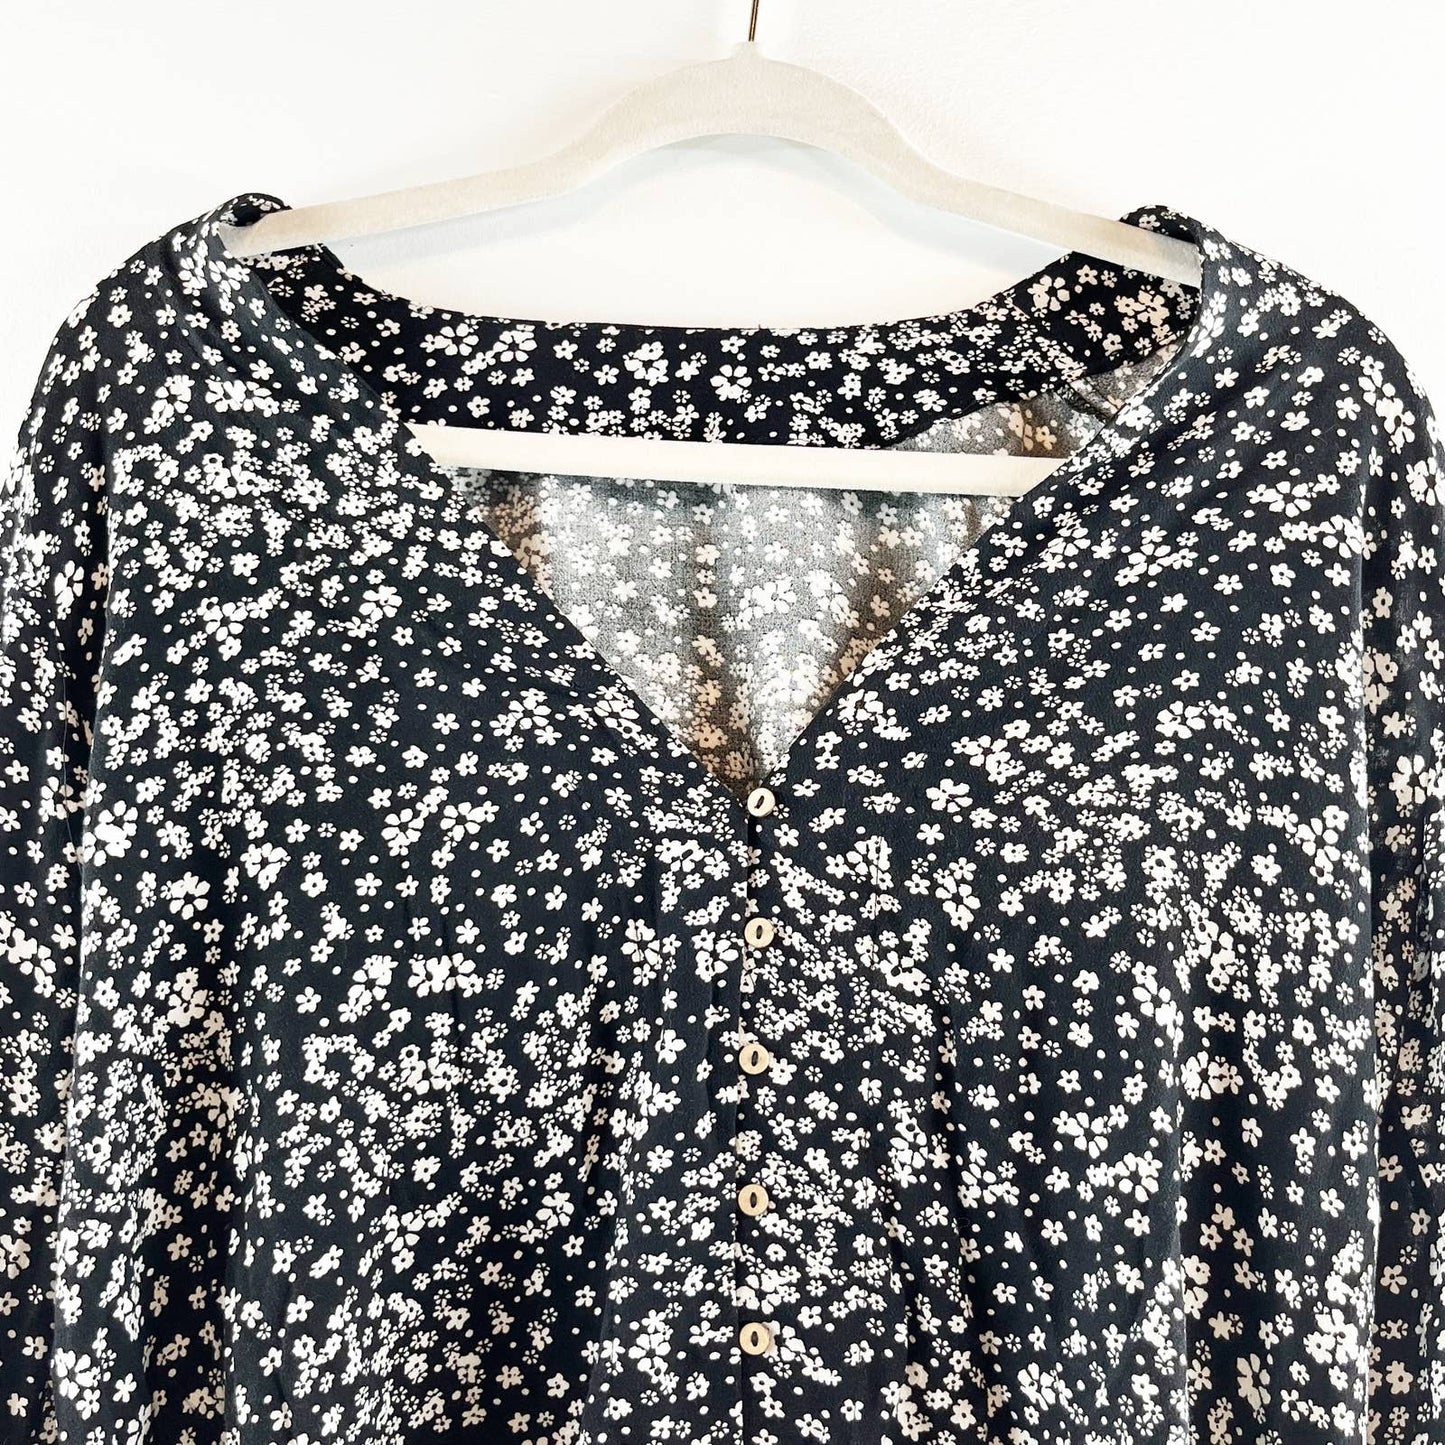 Free People Ditsy Floral V Neck Long Bell Ruffle Sleeve Bodysuit Black Small